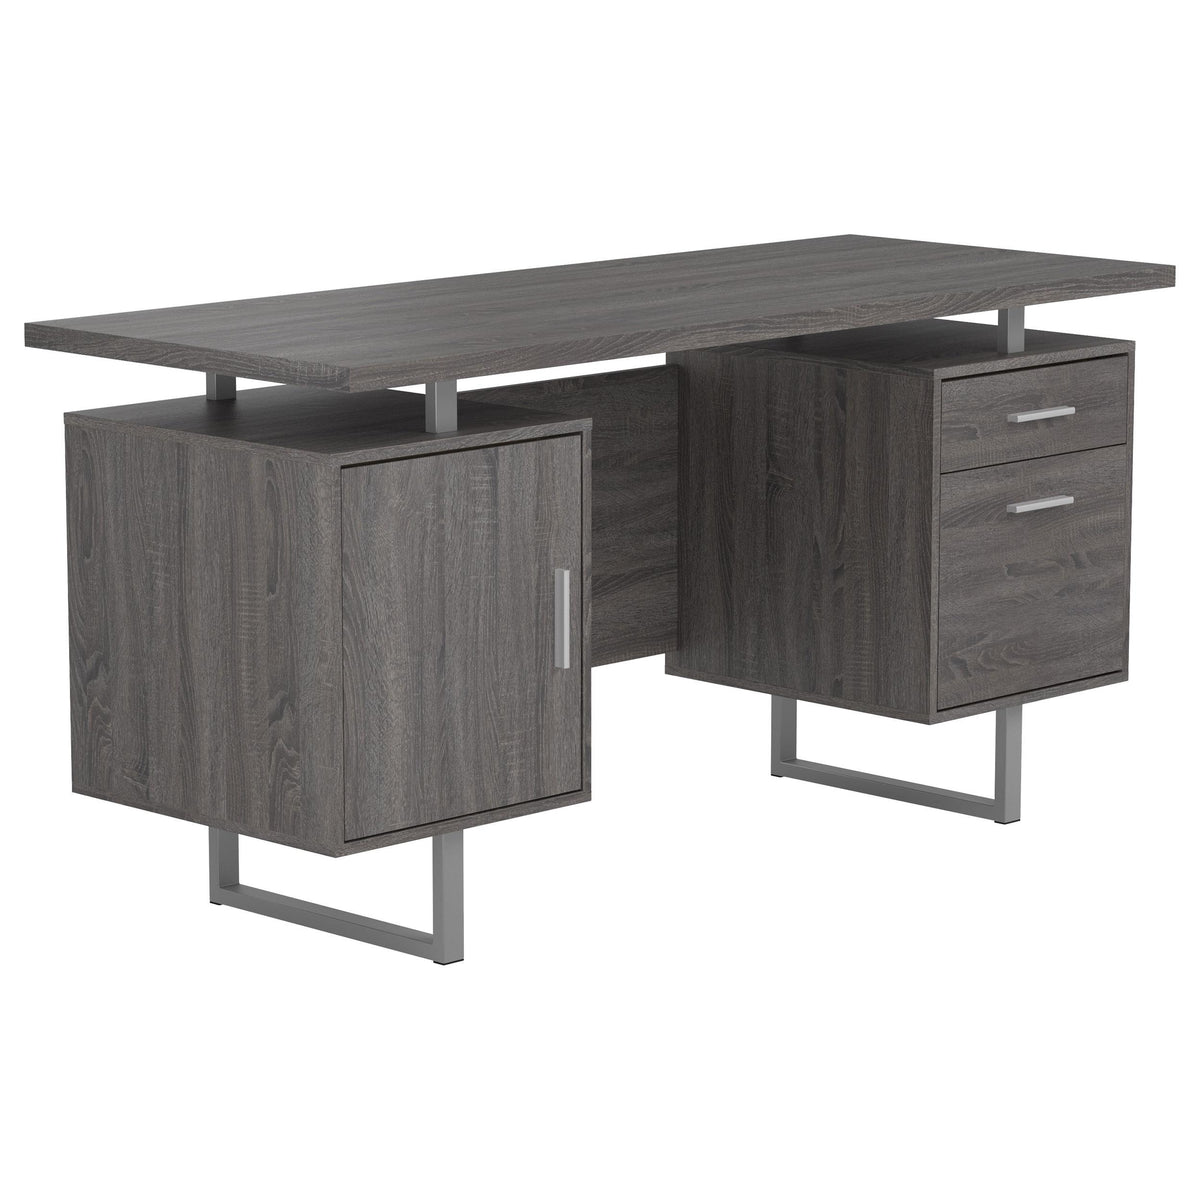 Lawtey Floating Top Office Desk Weathered Grey Lawtey Floating Top Office Desk Weathered Grey Half Price Furniture